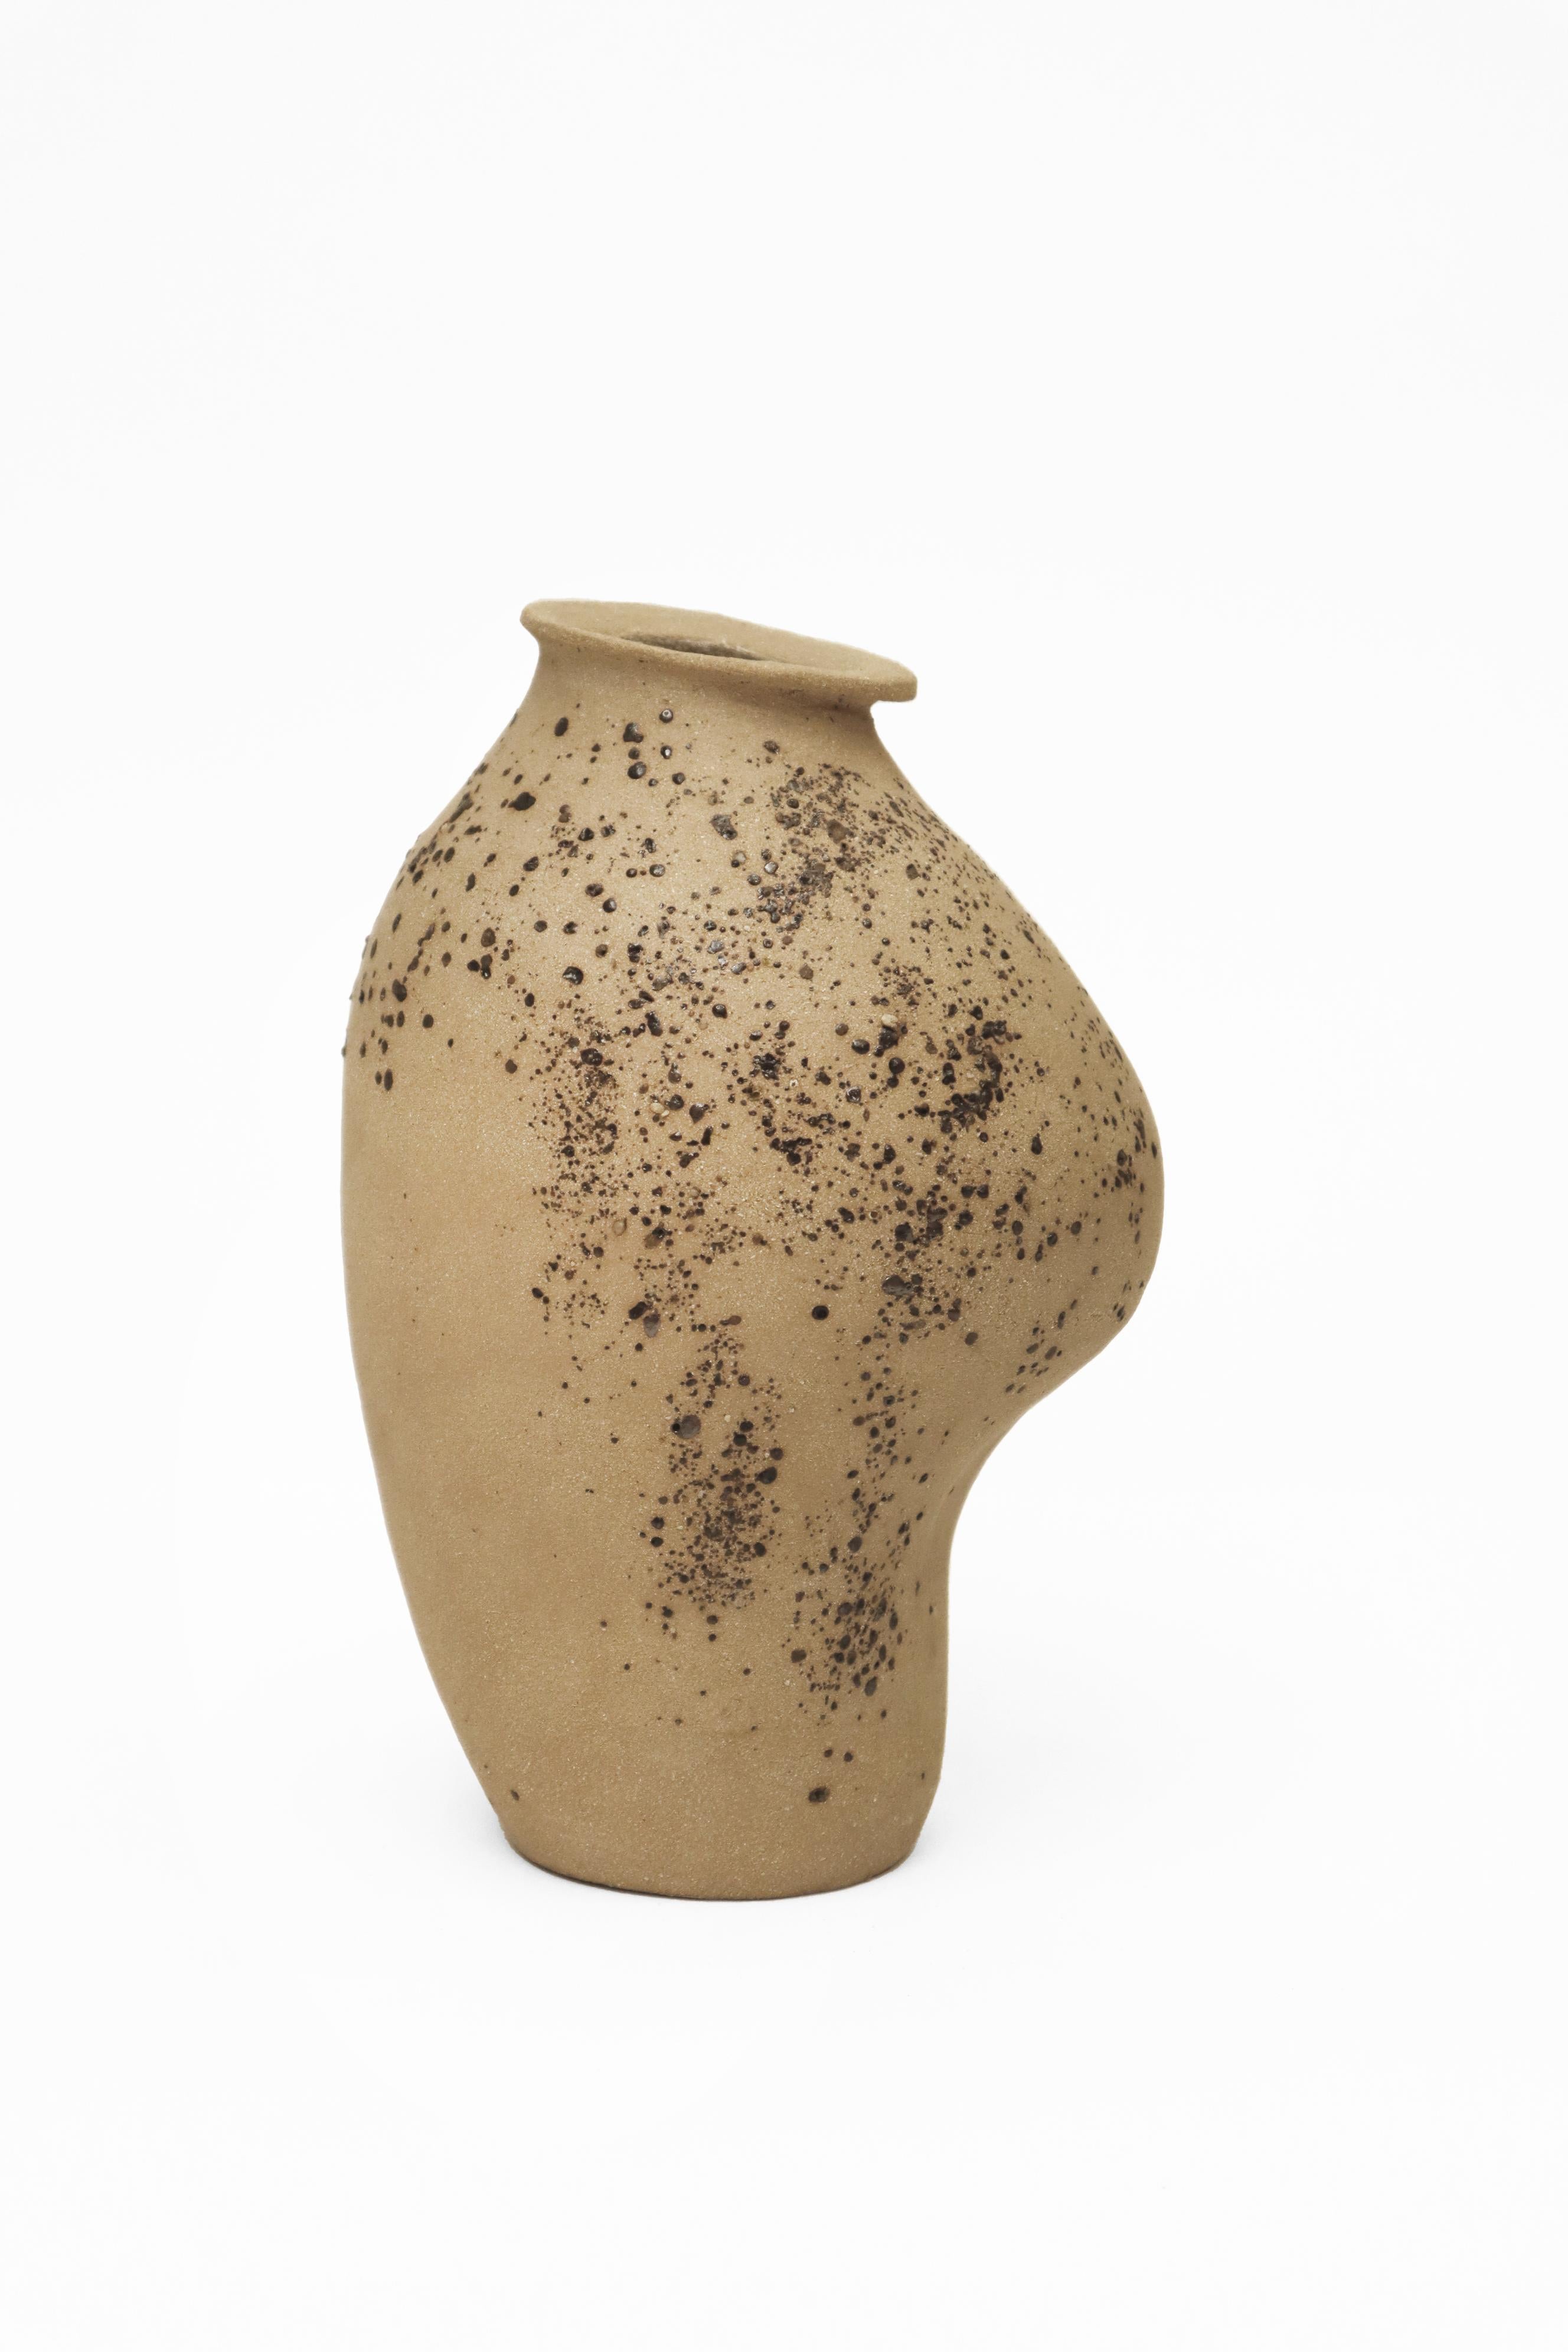 Stomata 3 vase by Anna Karountzou
Dimensions: W 13 x D 11 x H 22 cm
Materials: Beige stoneware clay, clear glaze inside, decorated outside with volcano rocks collected from Santorini, fired at 1240

Born and based in Athens, Greece, with a